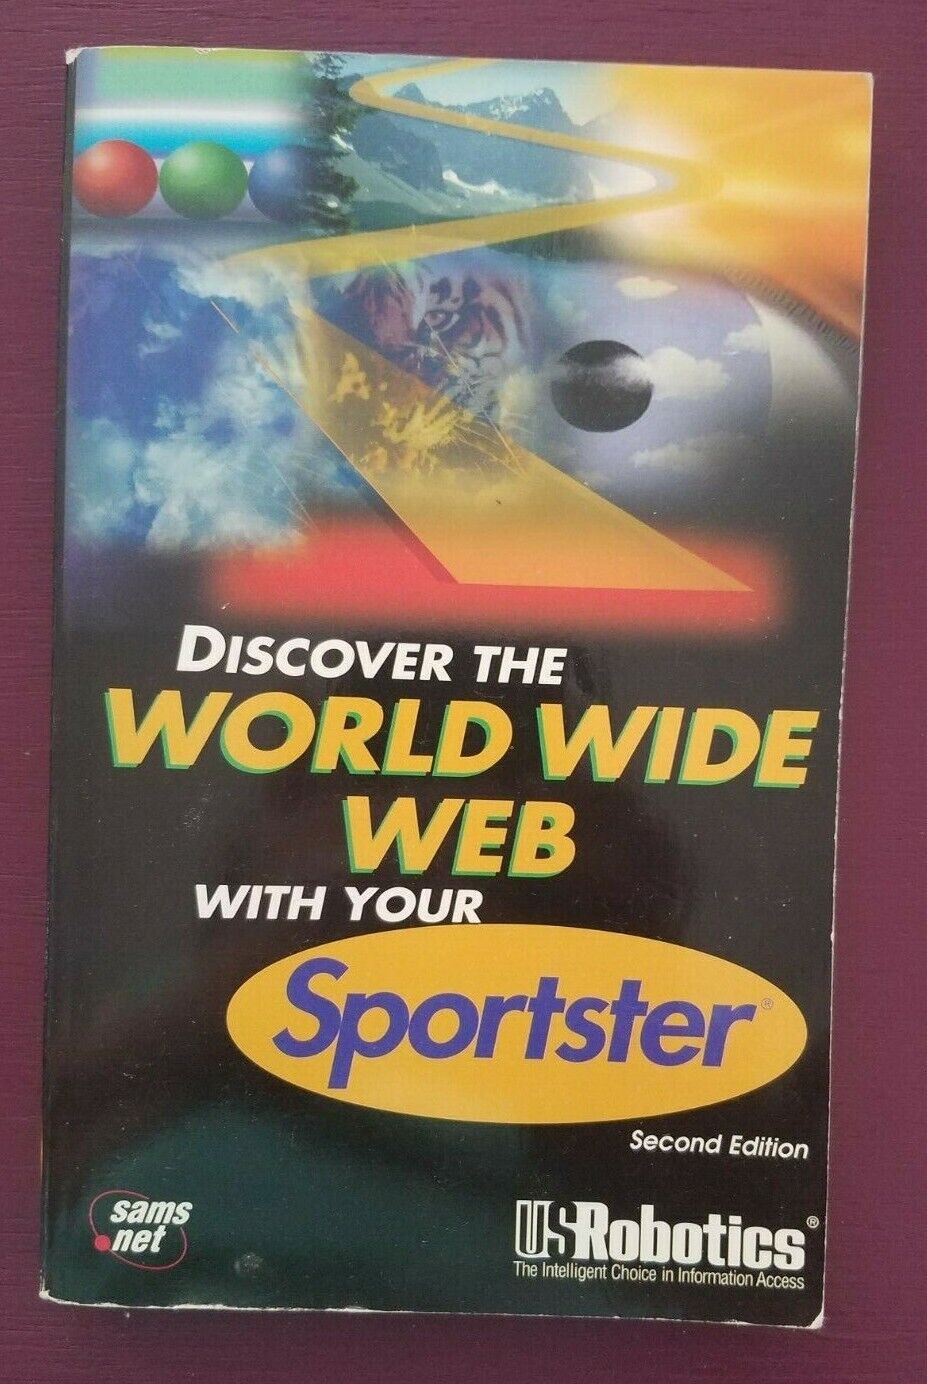 Vintage Book - Discover the World Wide Web with Your Sportster (1996, Paperback)